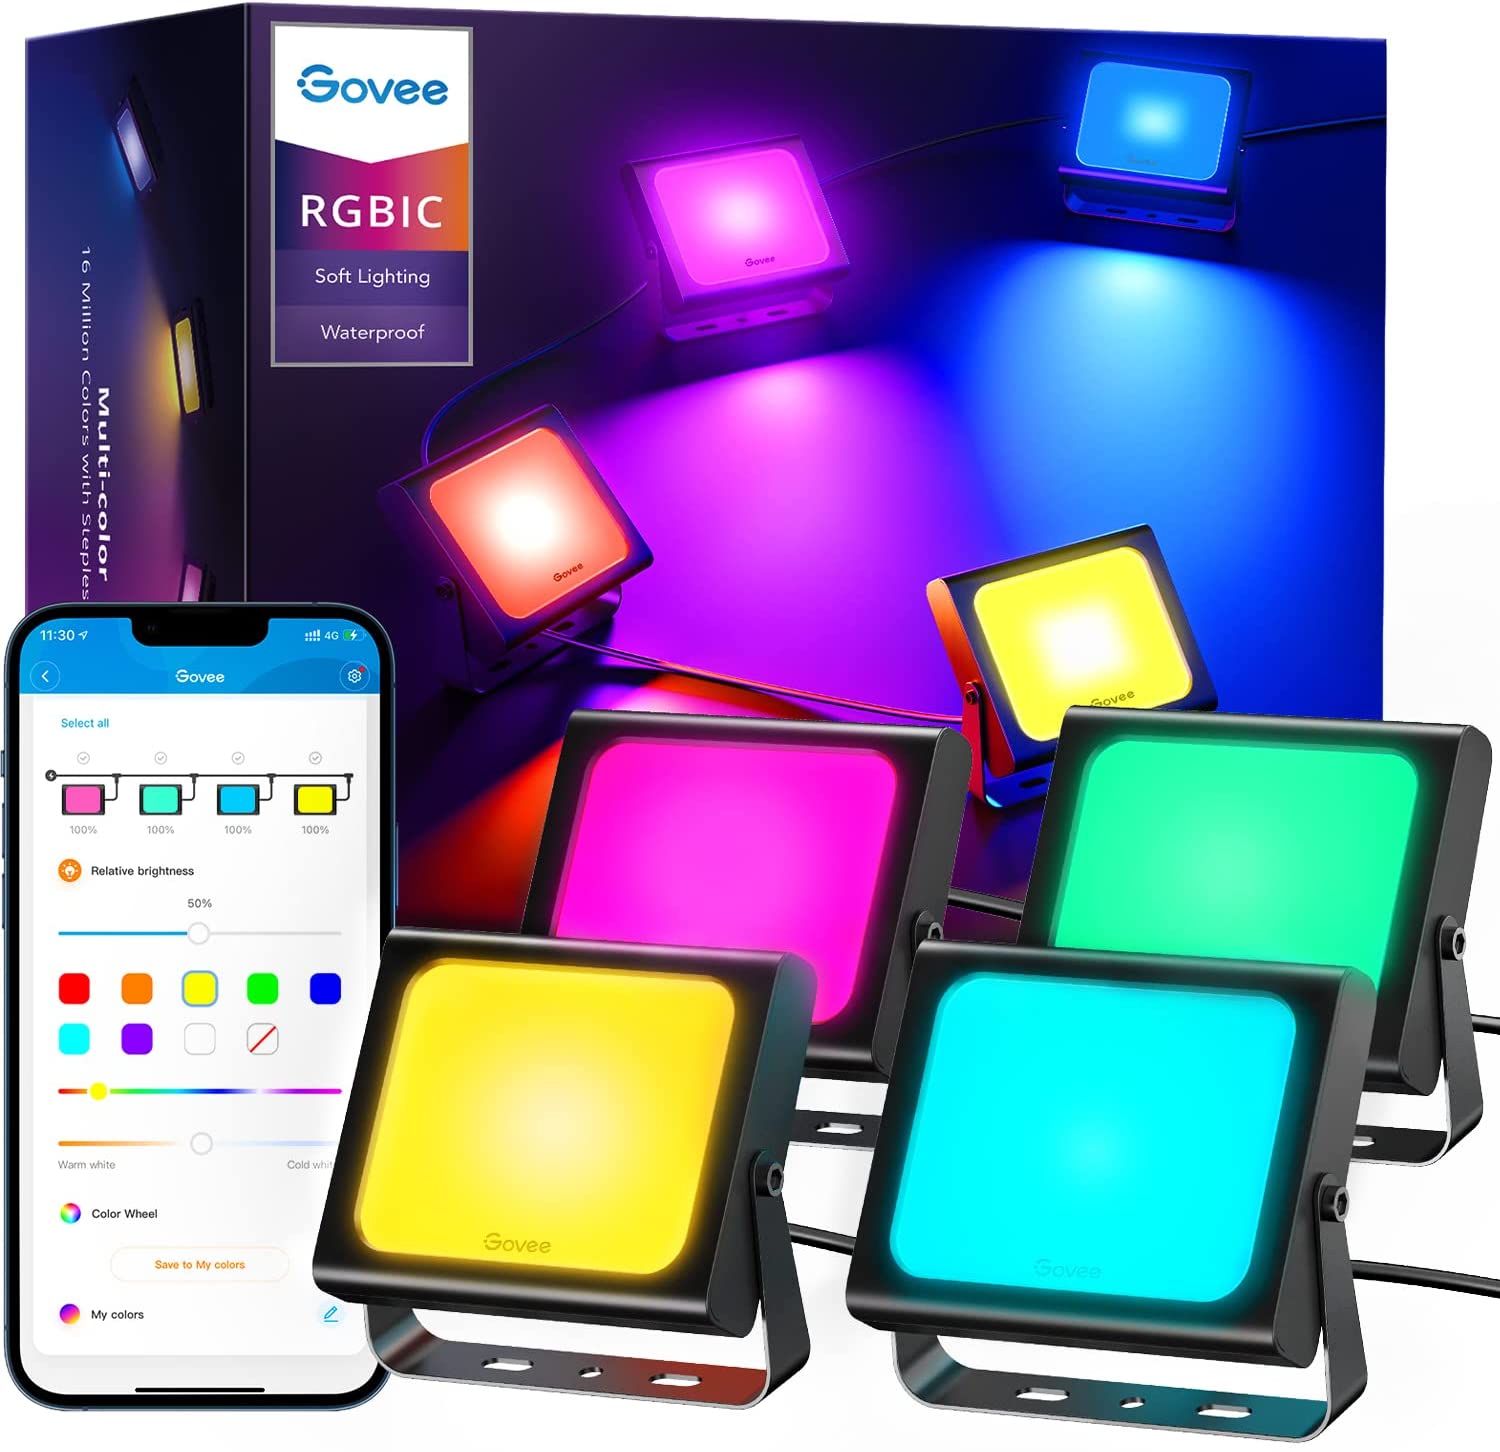 Govee WiFi RGBIC Flood Lights Outdoor with App Control, Color Changing 500lm 2700-6500K, IP66 Waterproof, 28 Scene Modes - $79.99 + FS with PRIME